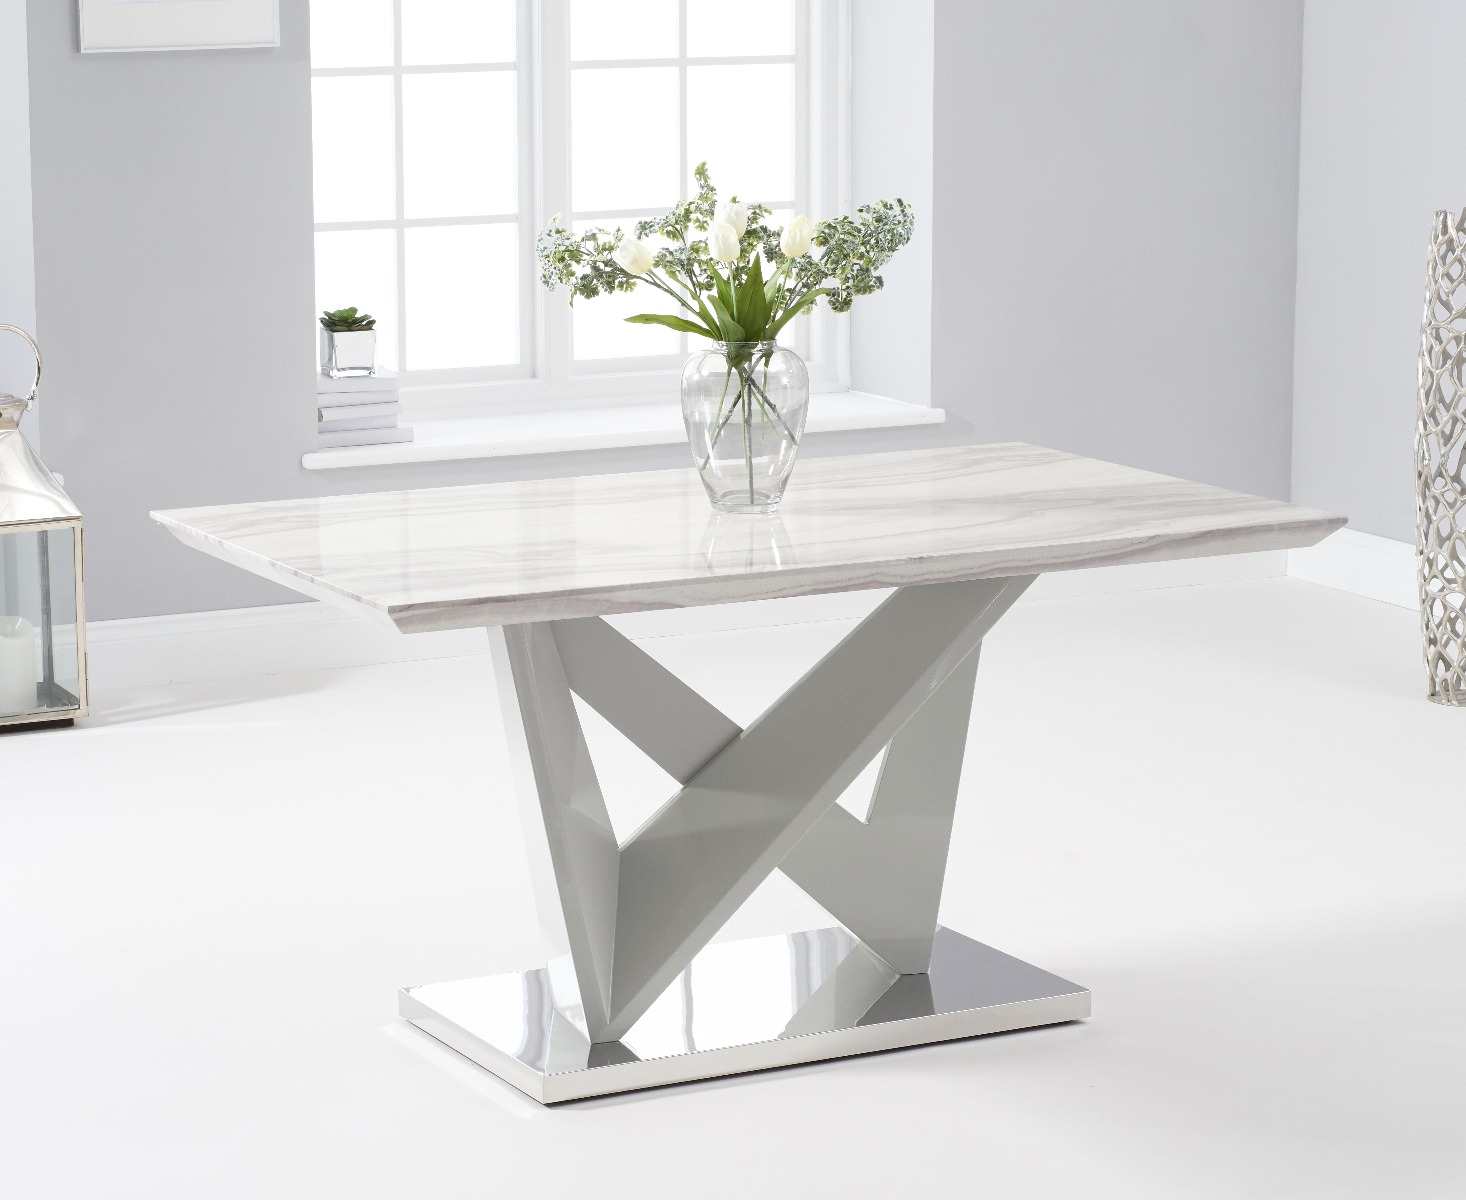 Photo 1 of Reims 150cm marble effect carrera light grey dining table with 6 grey aldo chairs